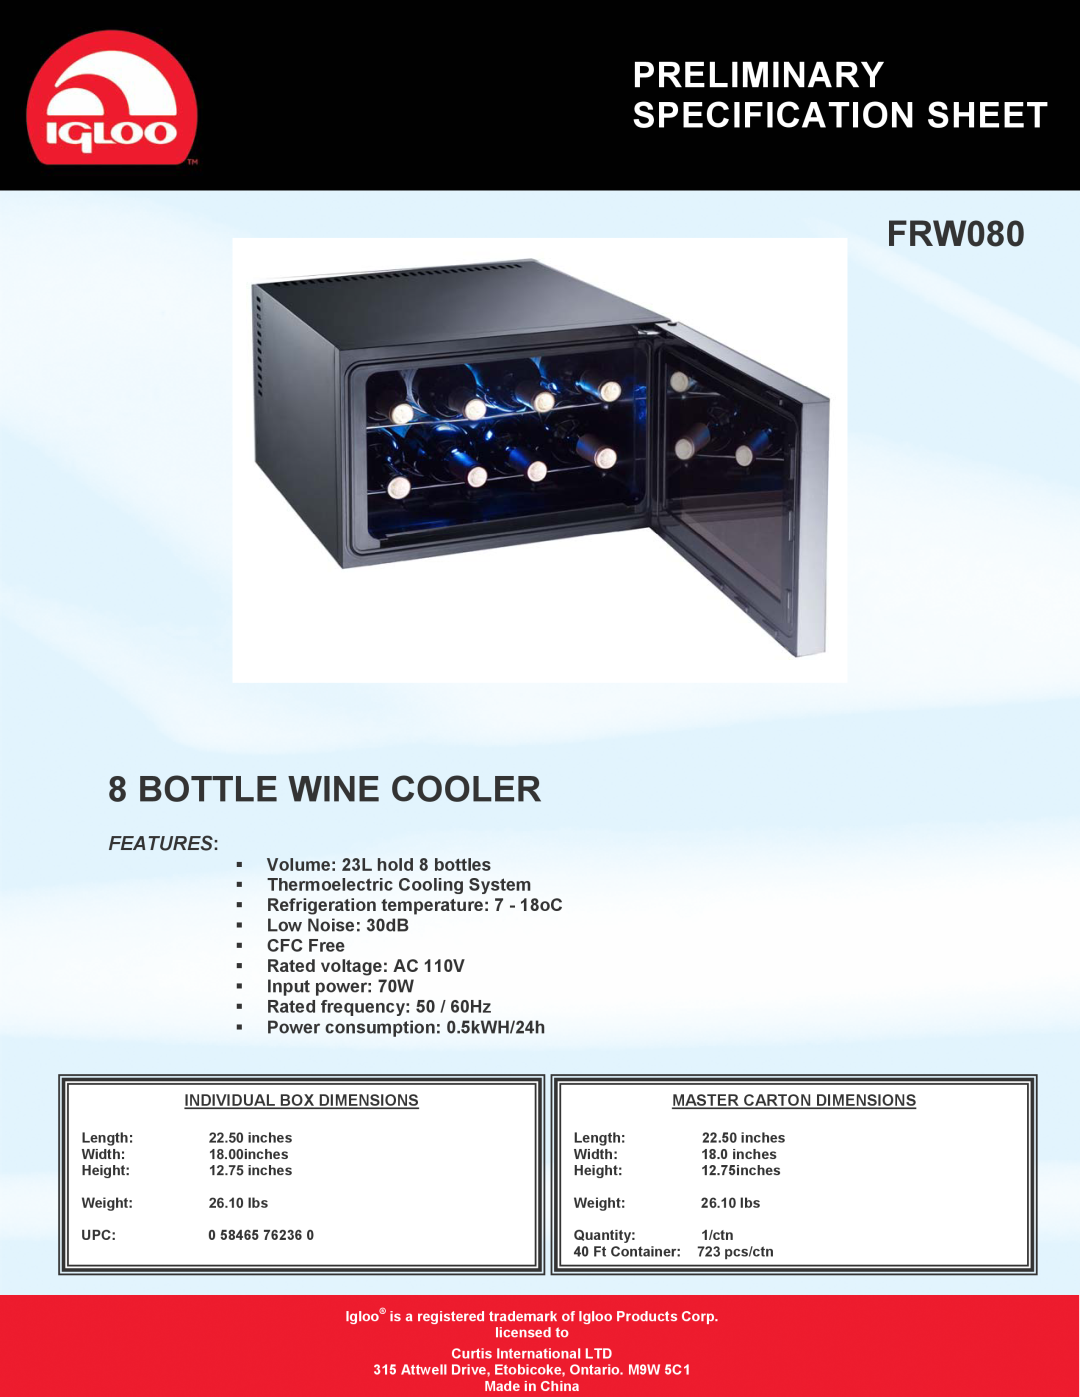 Curtis specifications Preliminary Specification Sheet, FRW080 8 BOTTLE WINE COOLER, Features 